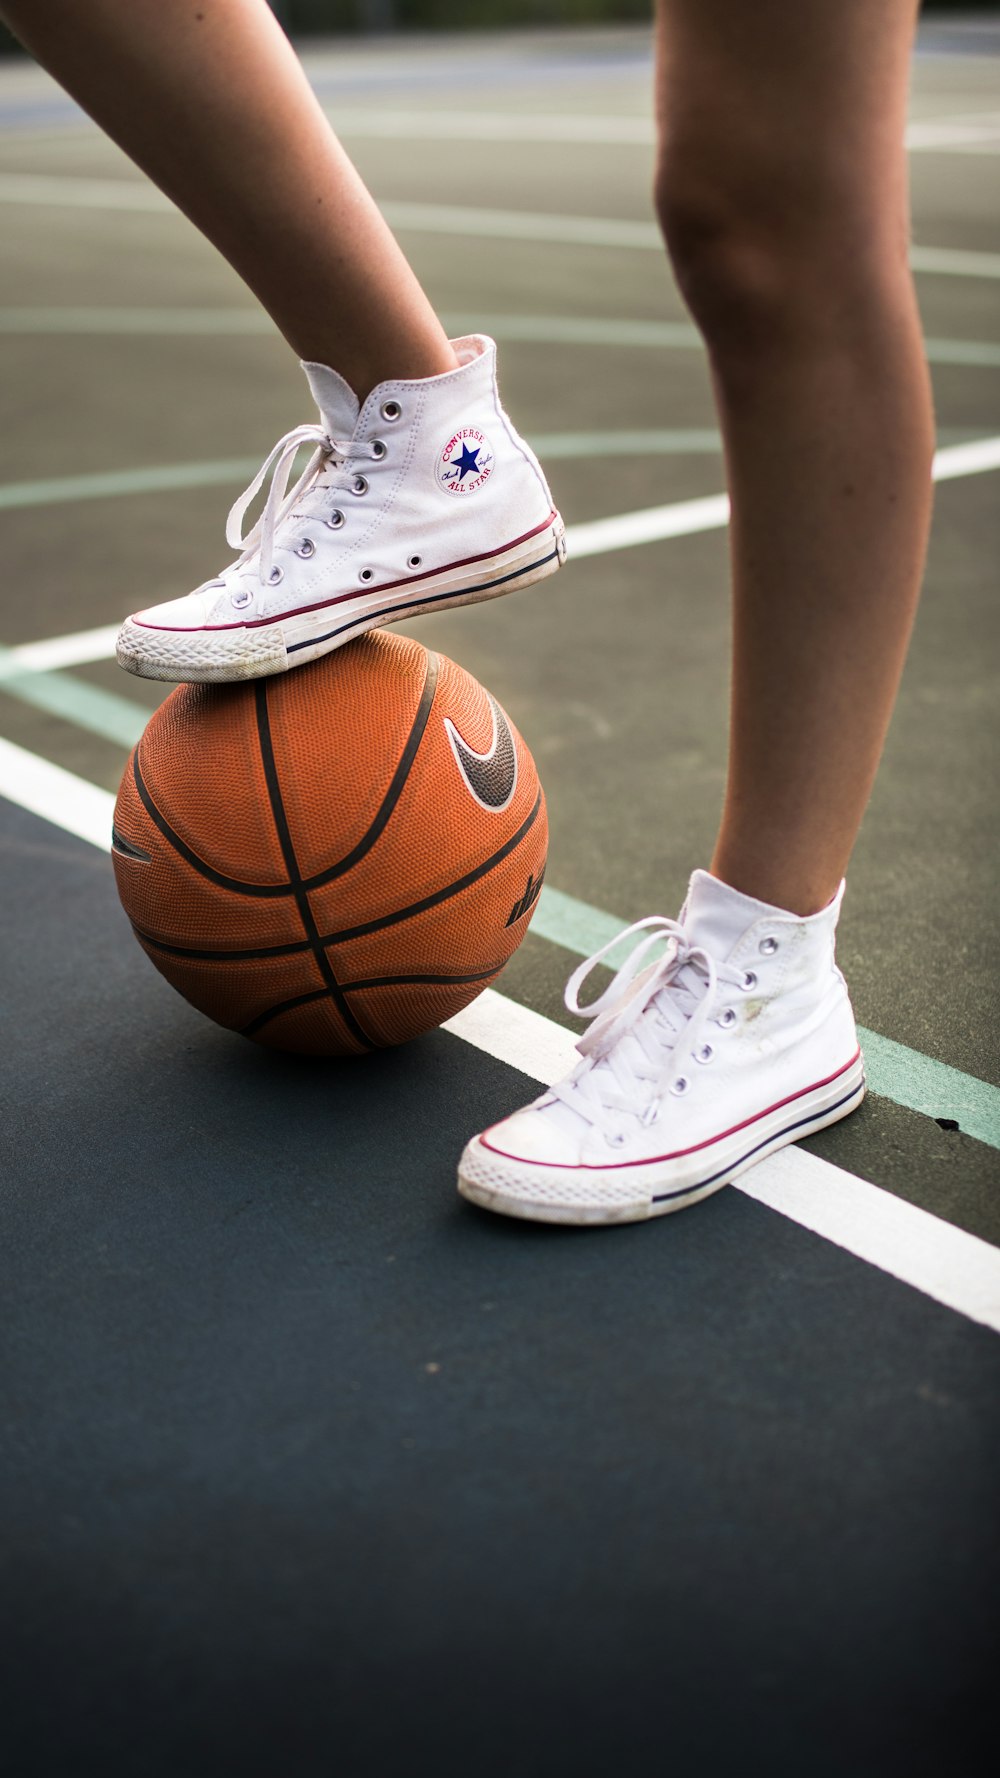 person in white nike basketball shoes standing on basketball court